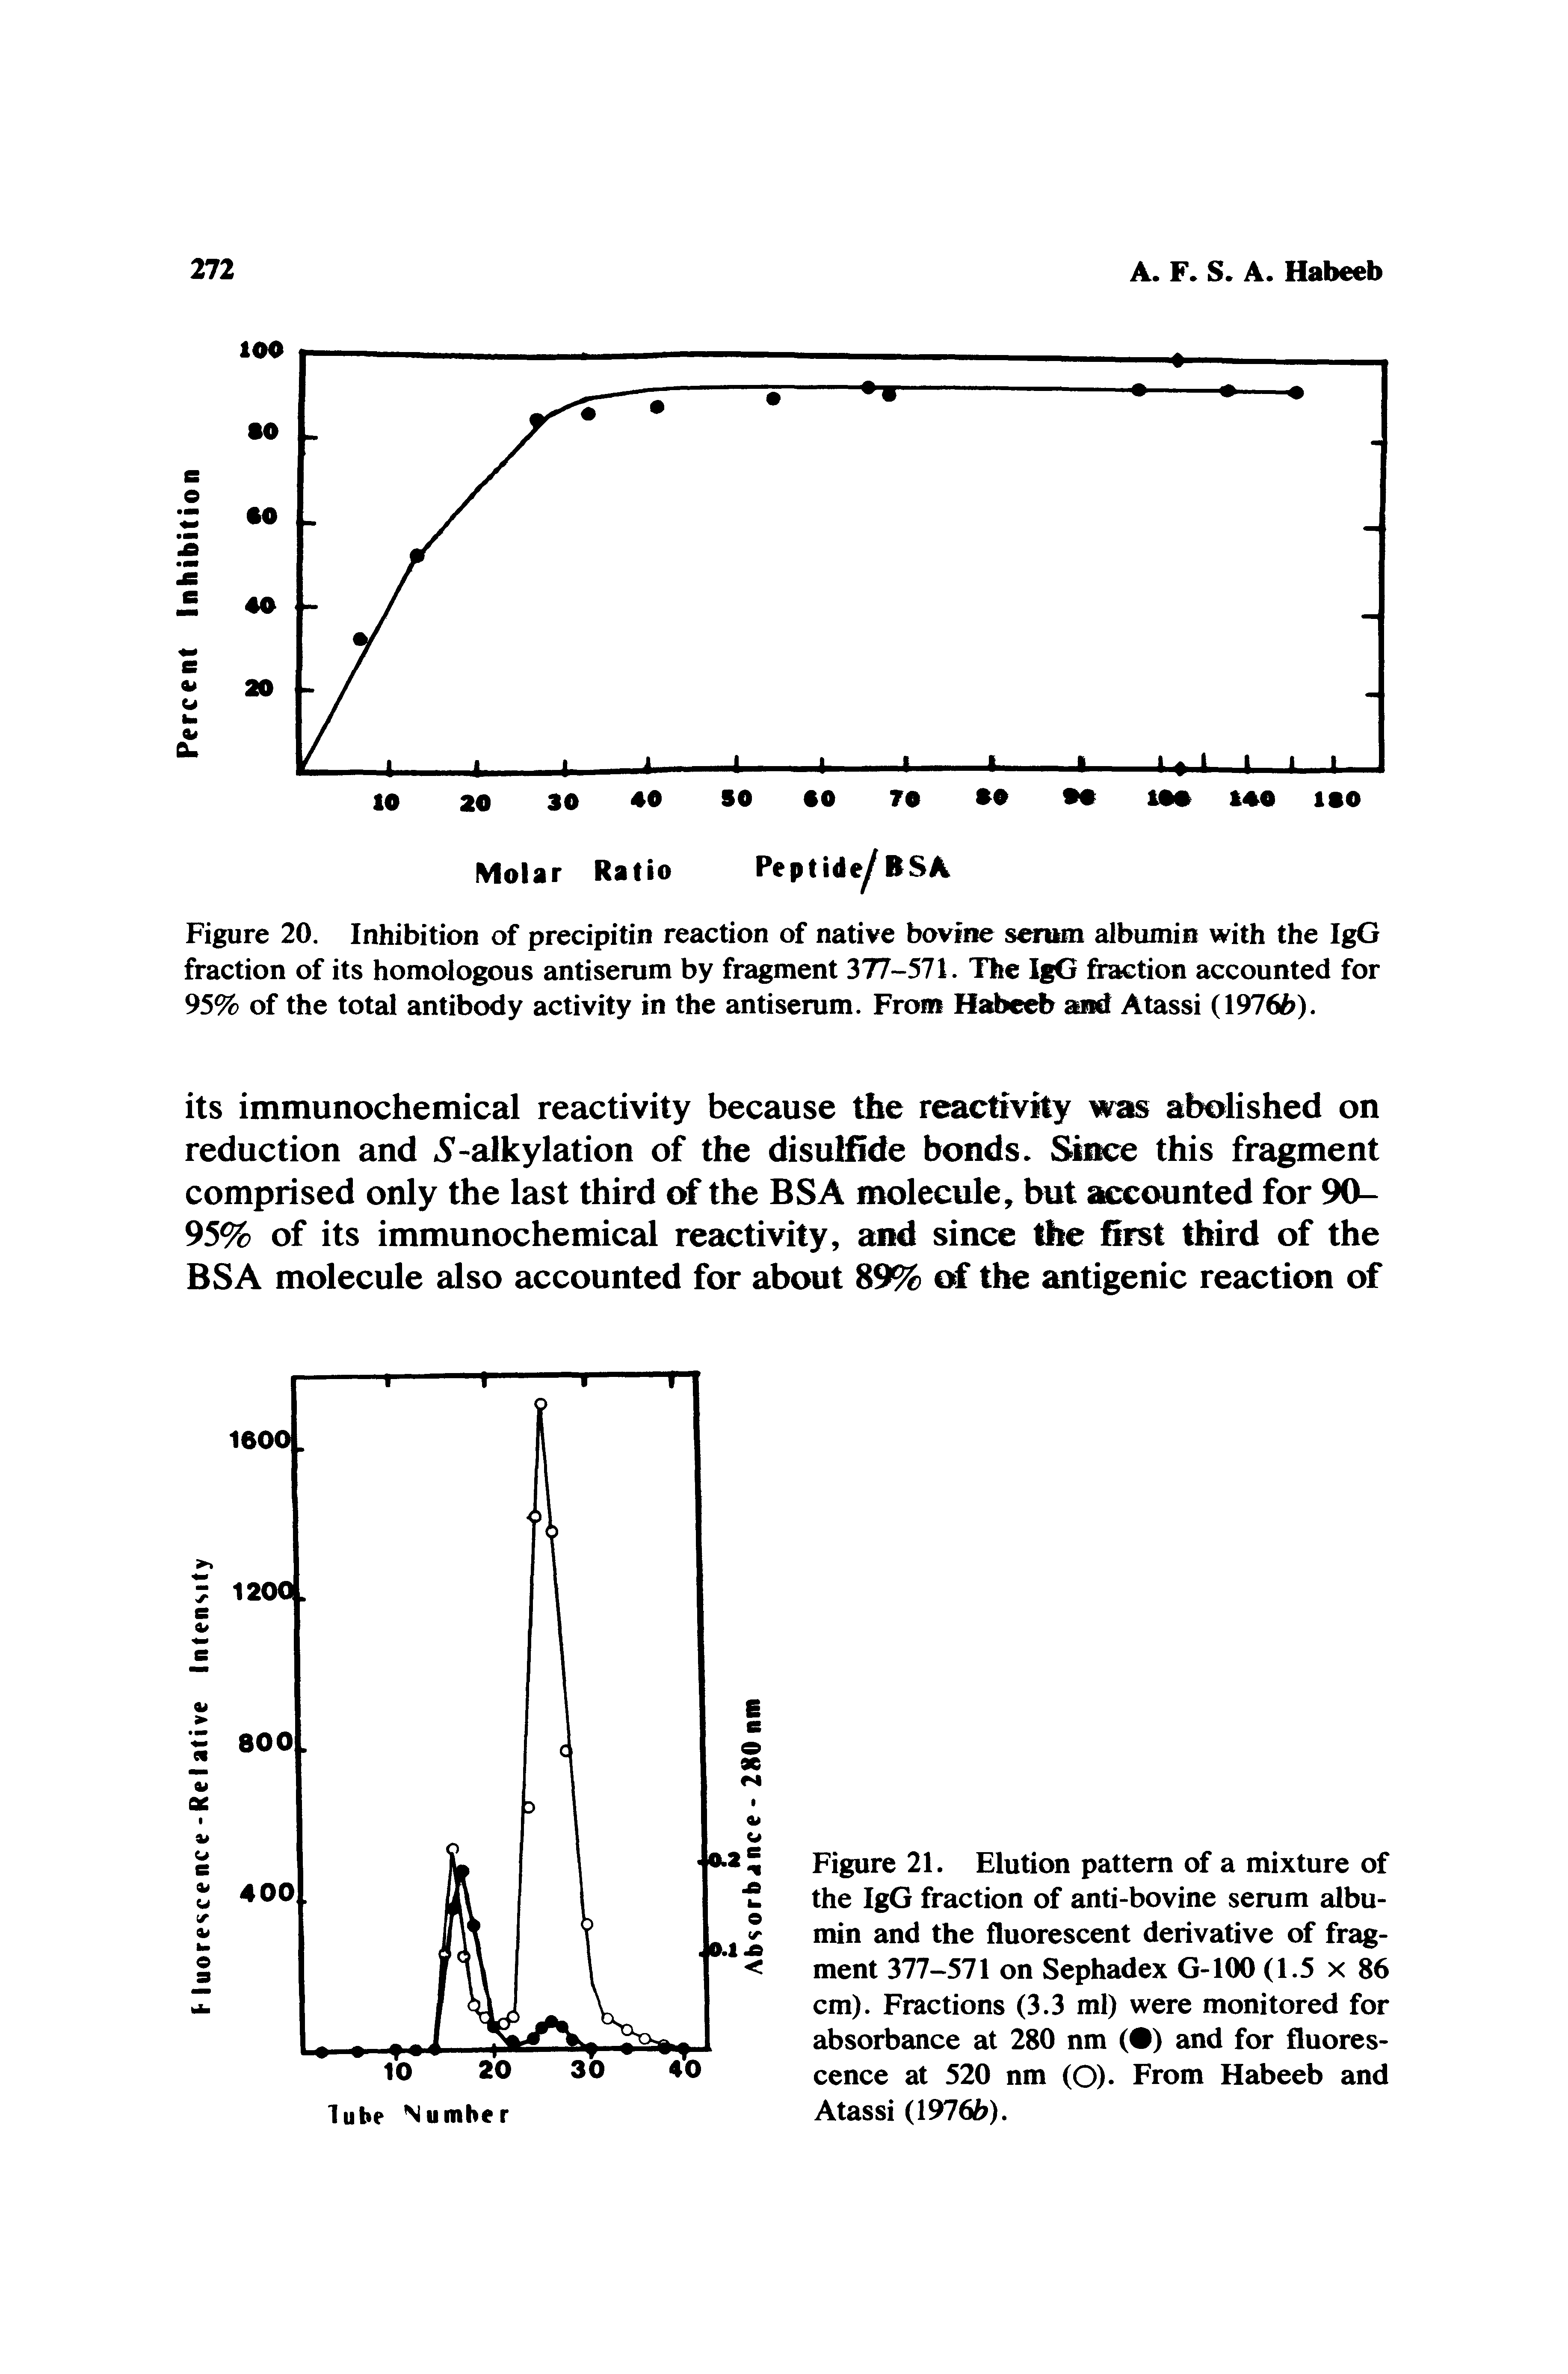 Figure 20. Inhibition of precipitin reaction of native bovine serum albumin with the IgG fraction of its homologous antiserum by fragment 377-571. The IgG fraction accounted for 95% of the total antibody activity in the antiserum. From Habeeb and Atassi (1976b).